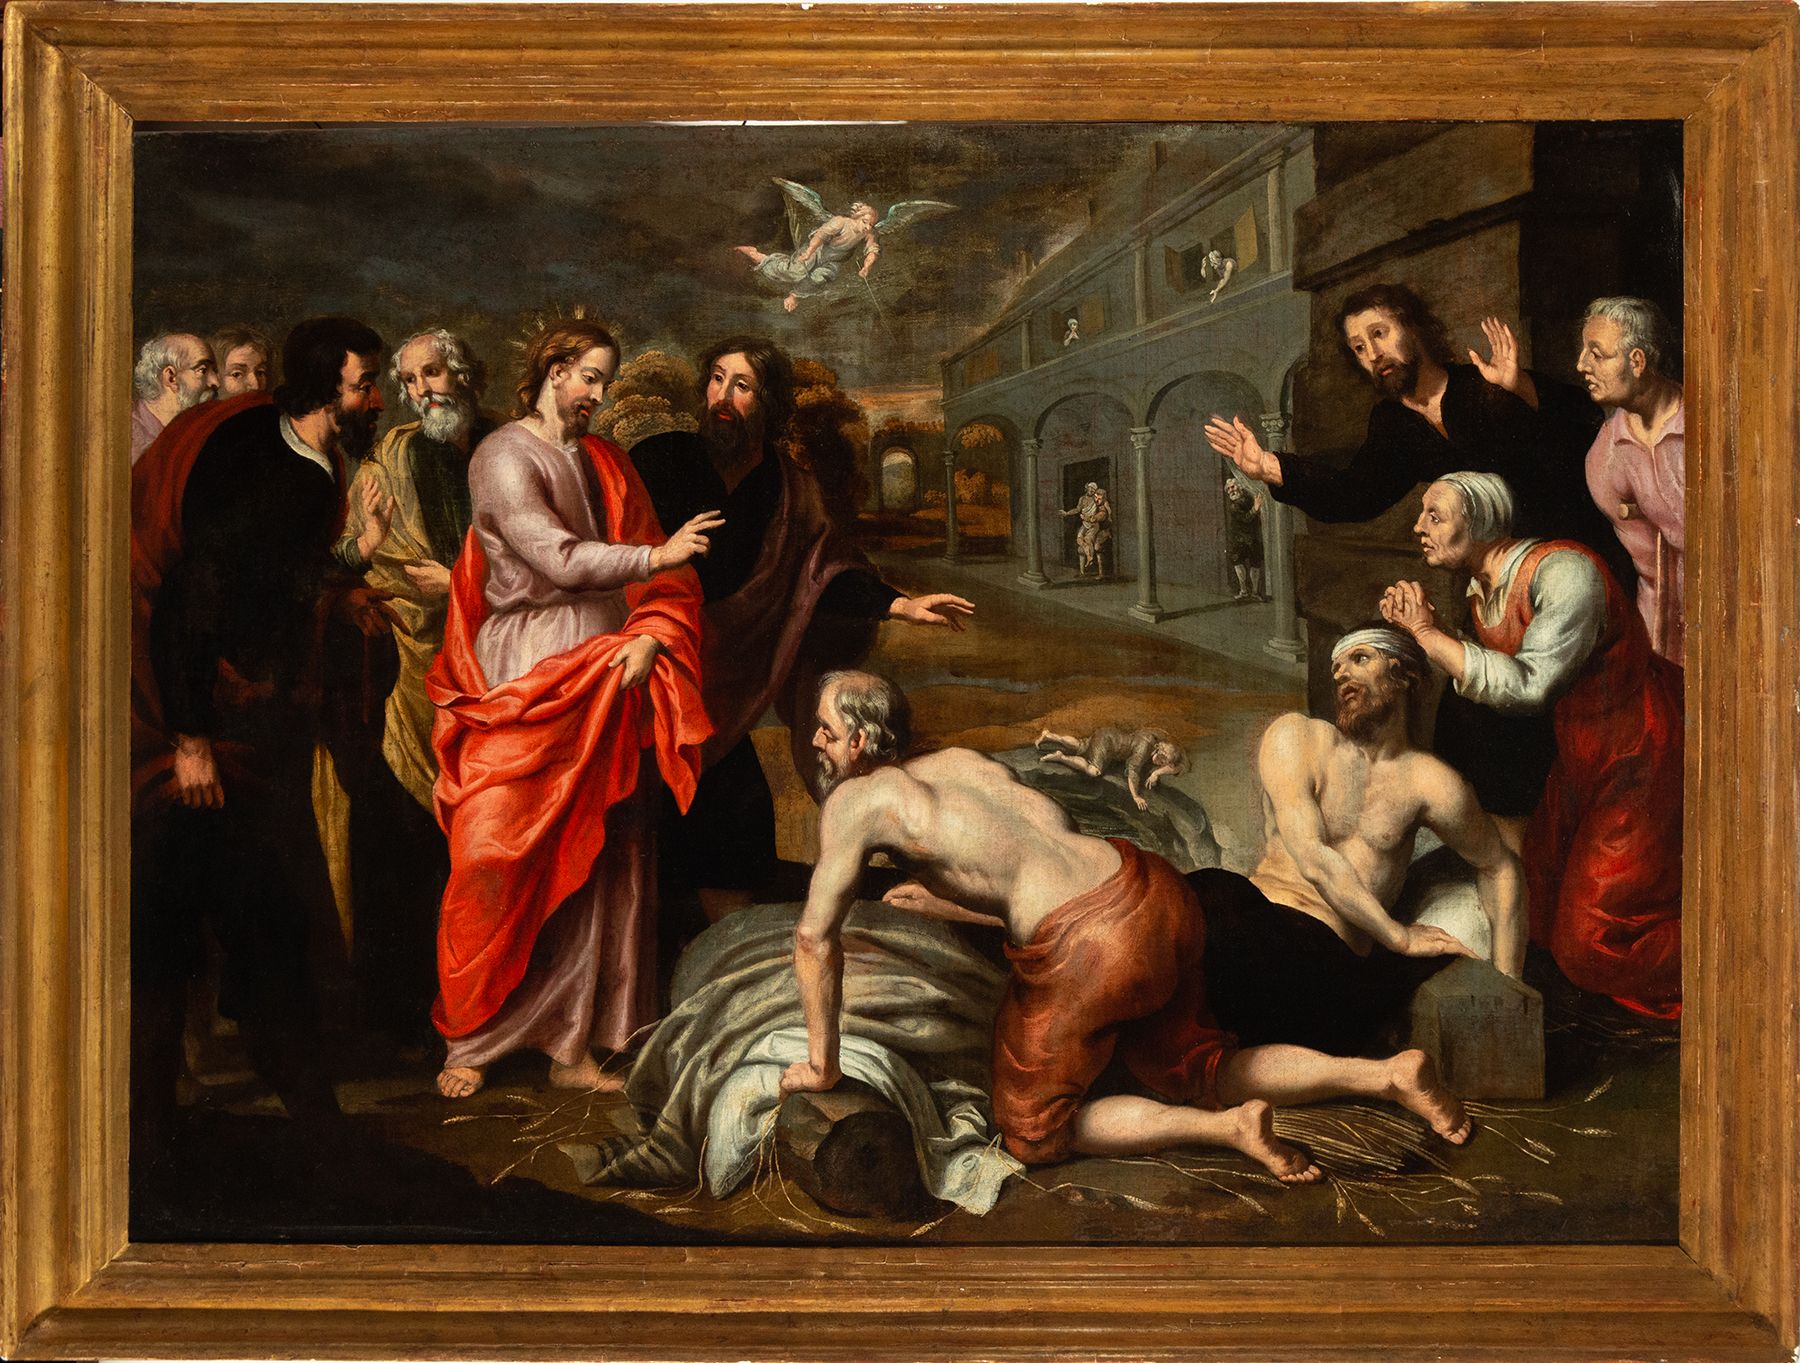 The Healing of the Paralytic at Capernaum, 17th century Flemish school, in the m&hellip;